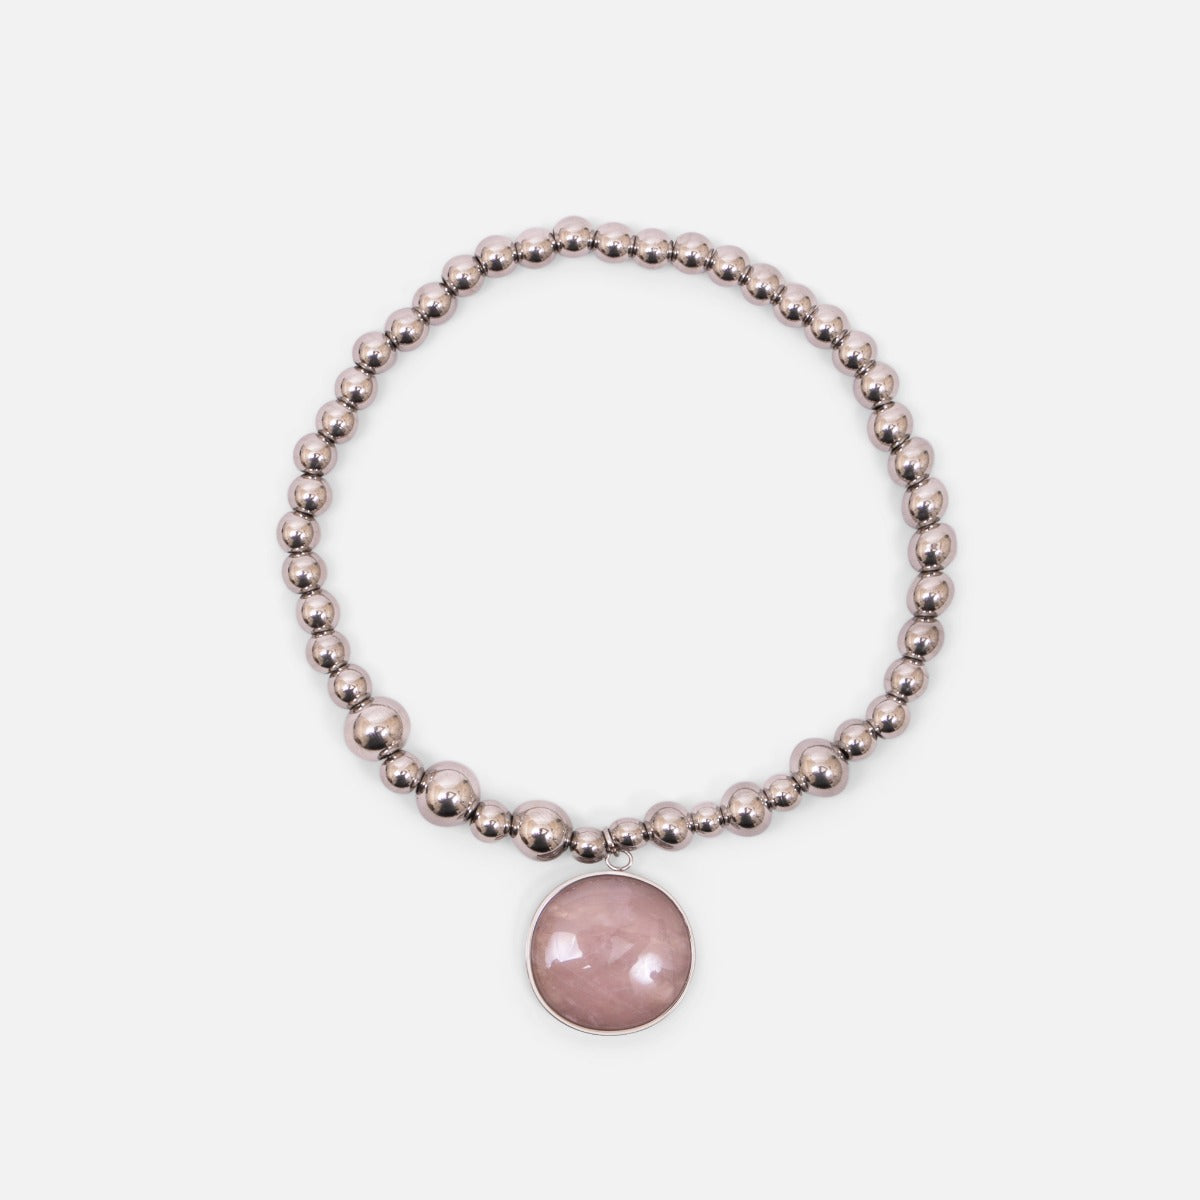 Silver and elastic stainless steel bracelet with pale pink mother-of-pearl round stone